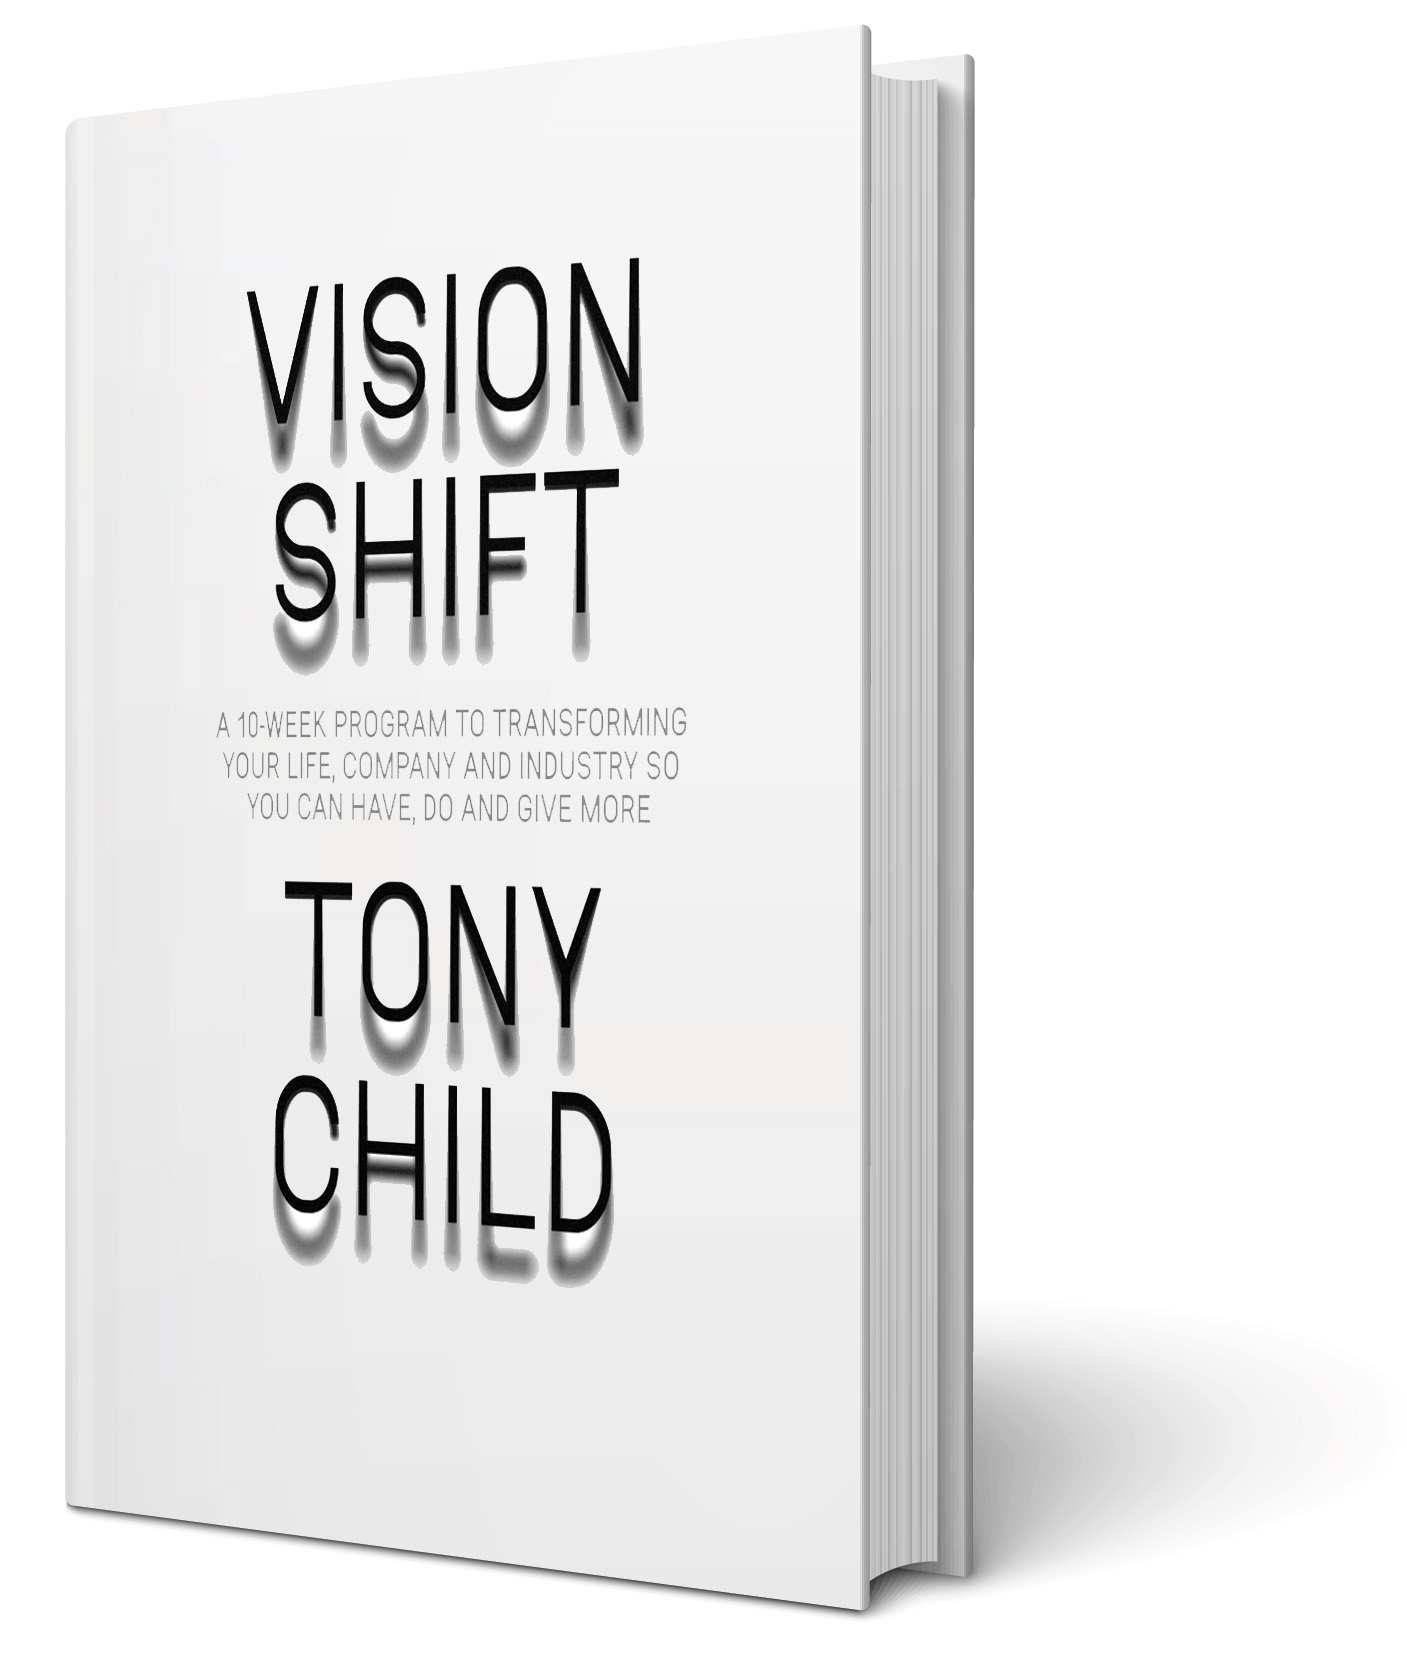 Vision Shift book cover